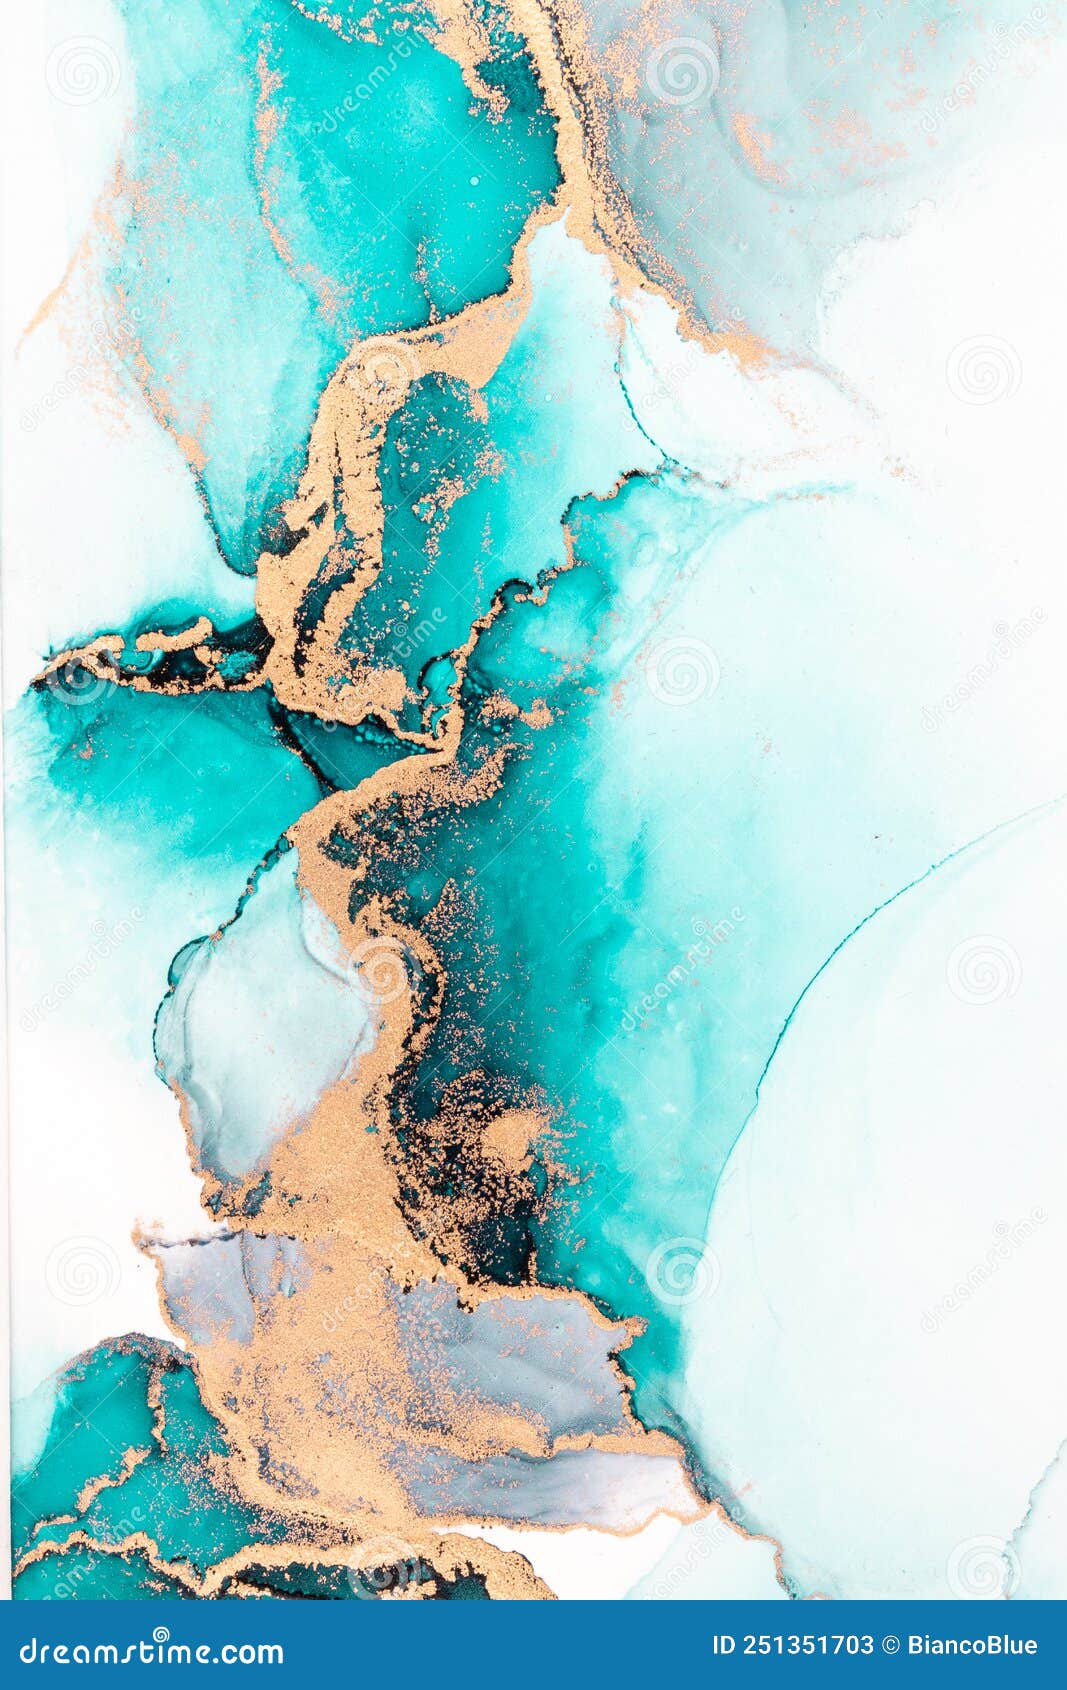 https://thumbs.dreamstime.com/z/ocean-blue-abstract-background-marble-liquid-ink-art-painting-paper-image-original-artwork-watercolor-alcohol-paint-high-251351703.jpg